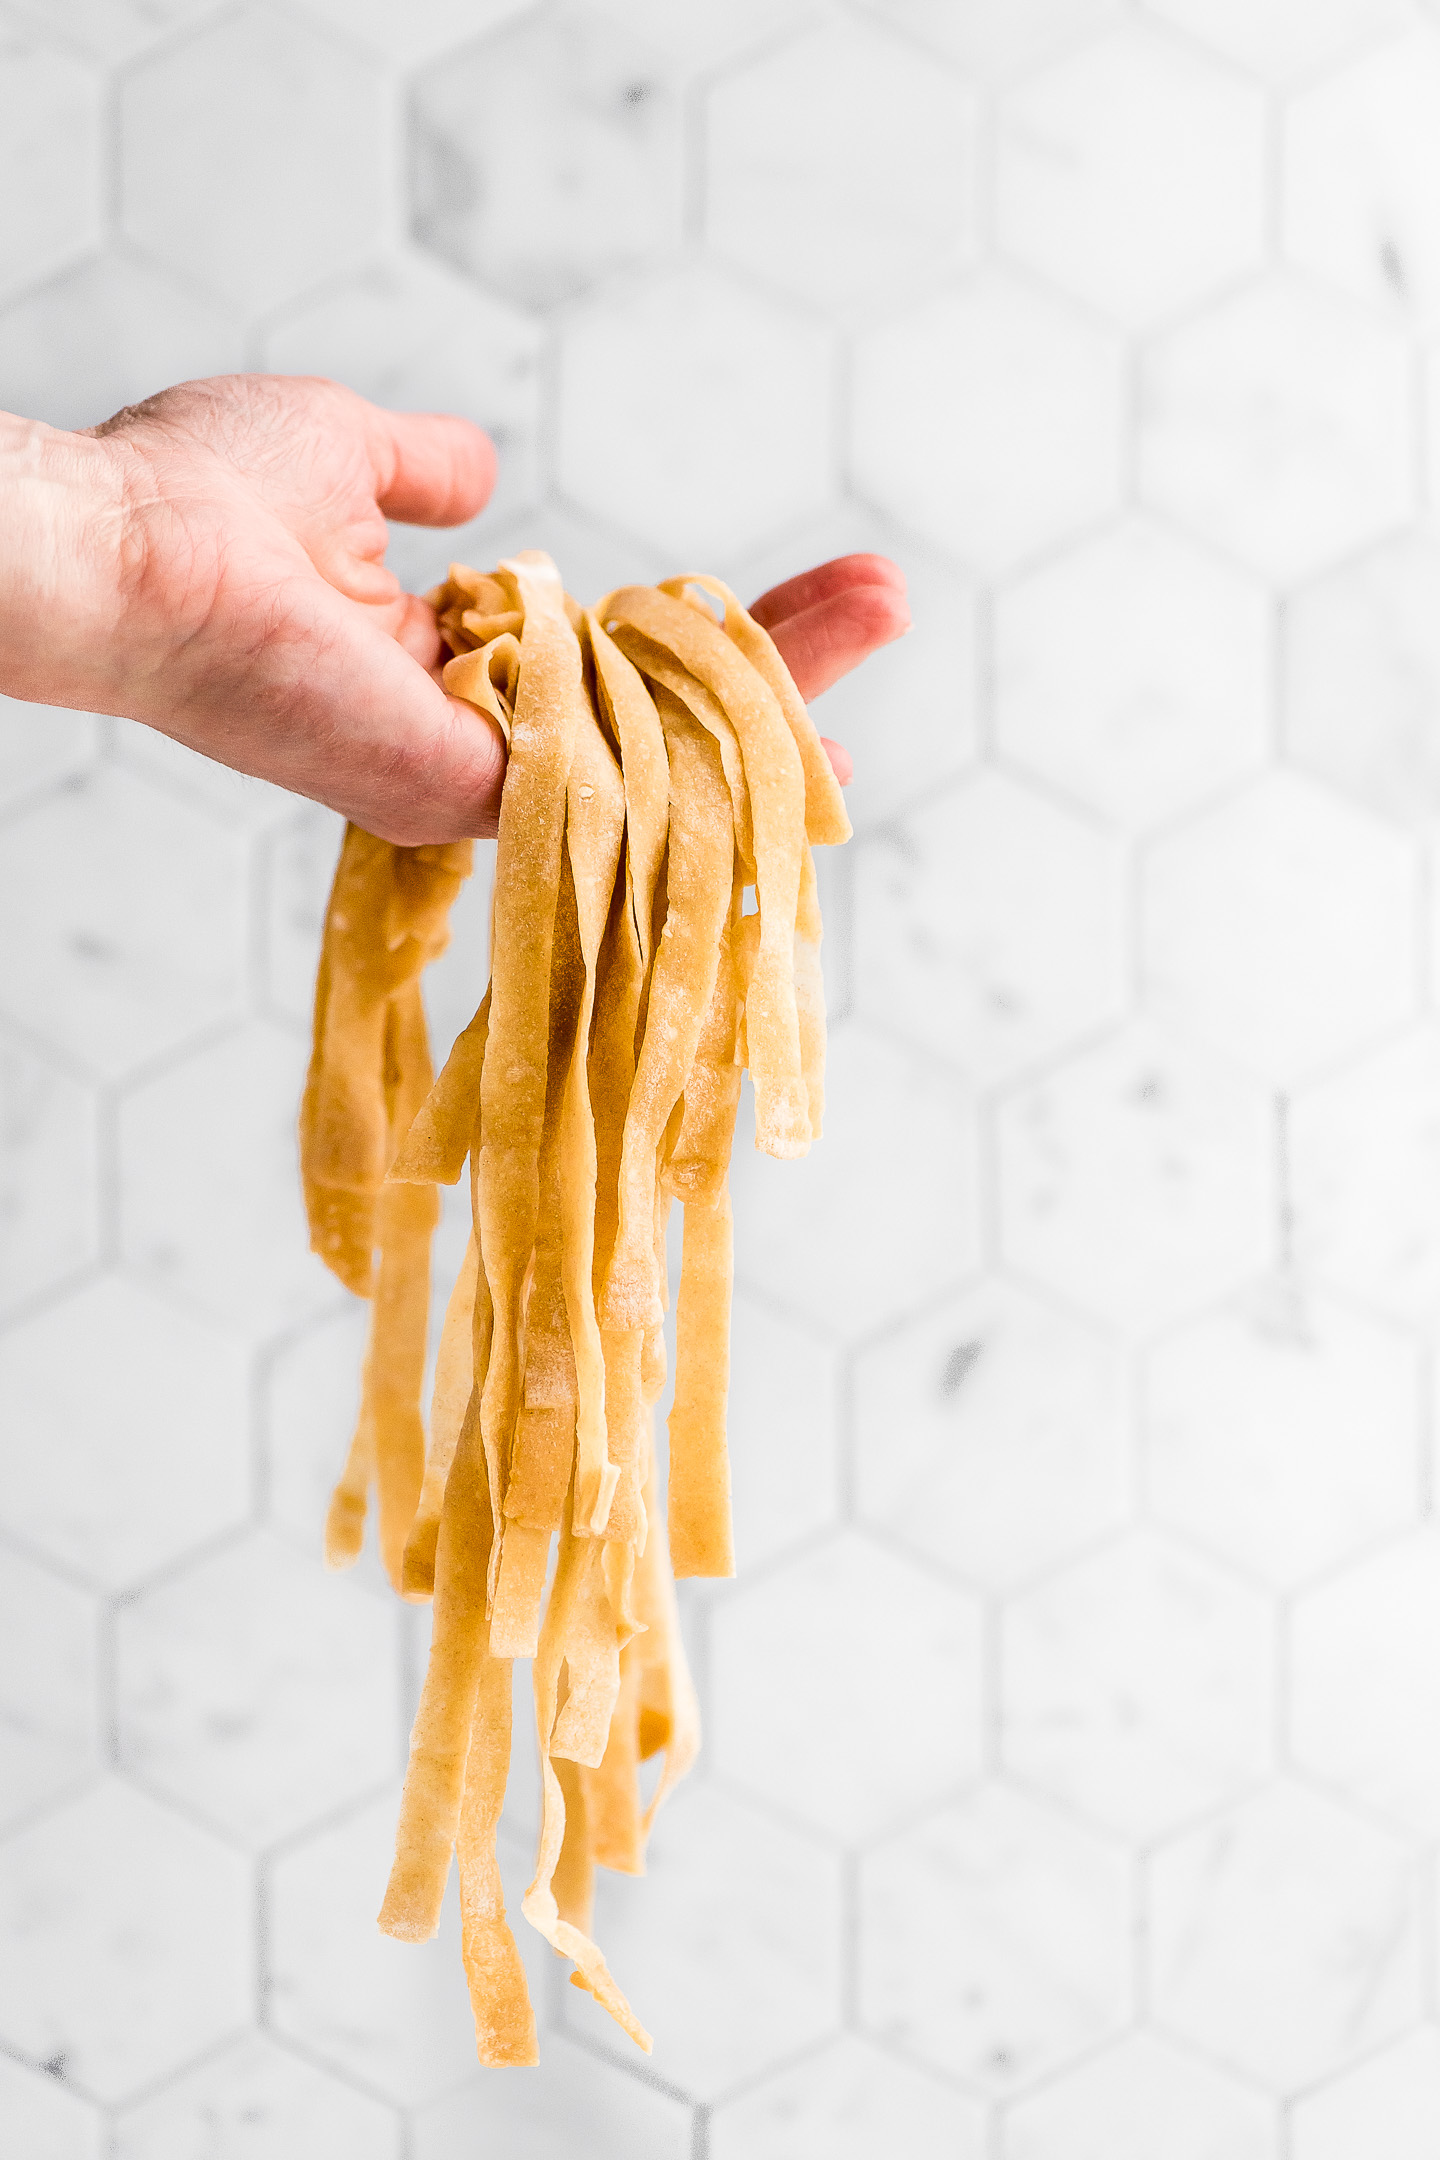 Fresh egg noodles draped over a hand and hanging down.